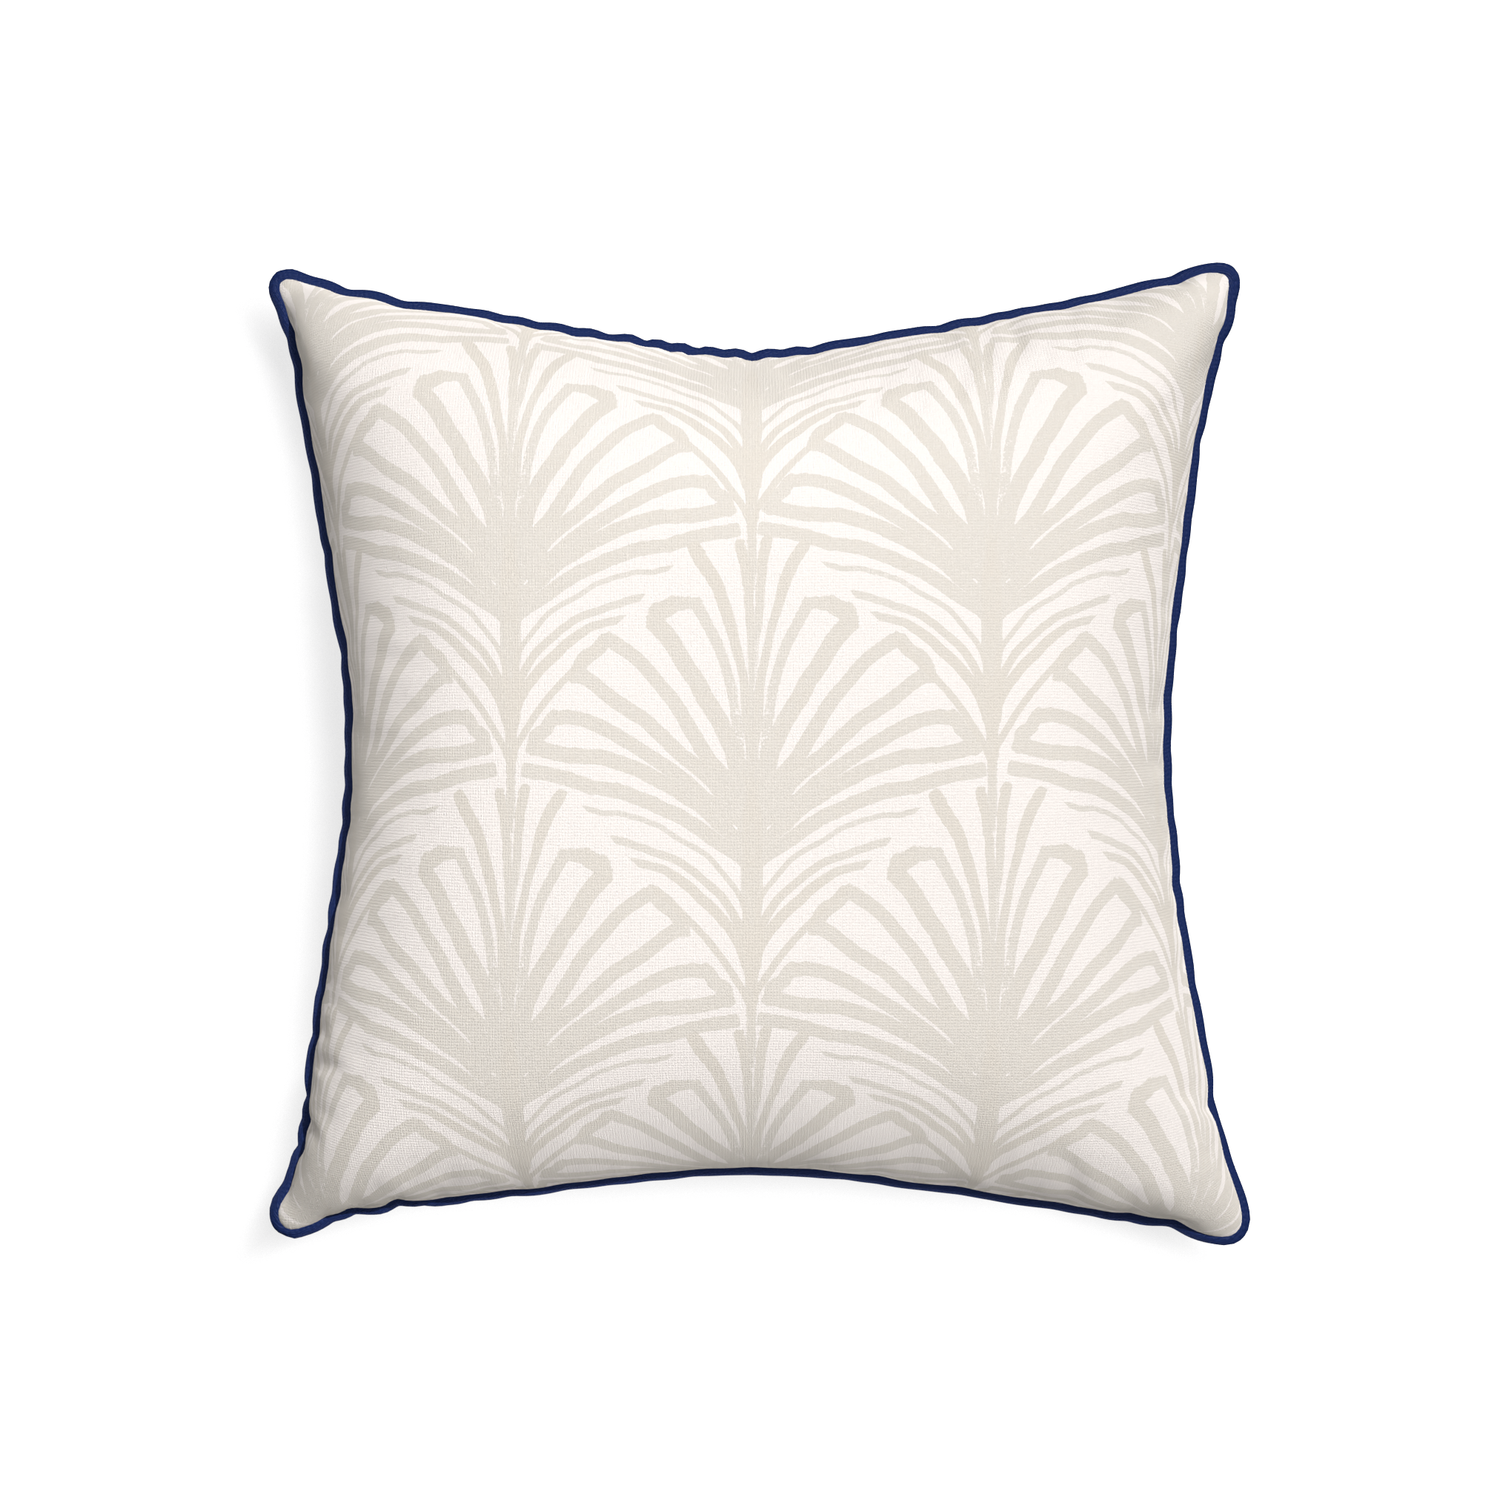 22-square suzy sand custom pillow with midnight piping on white background